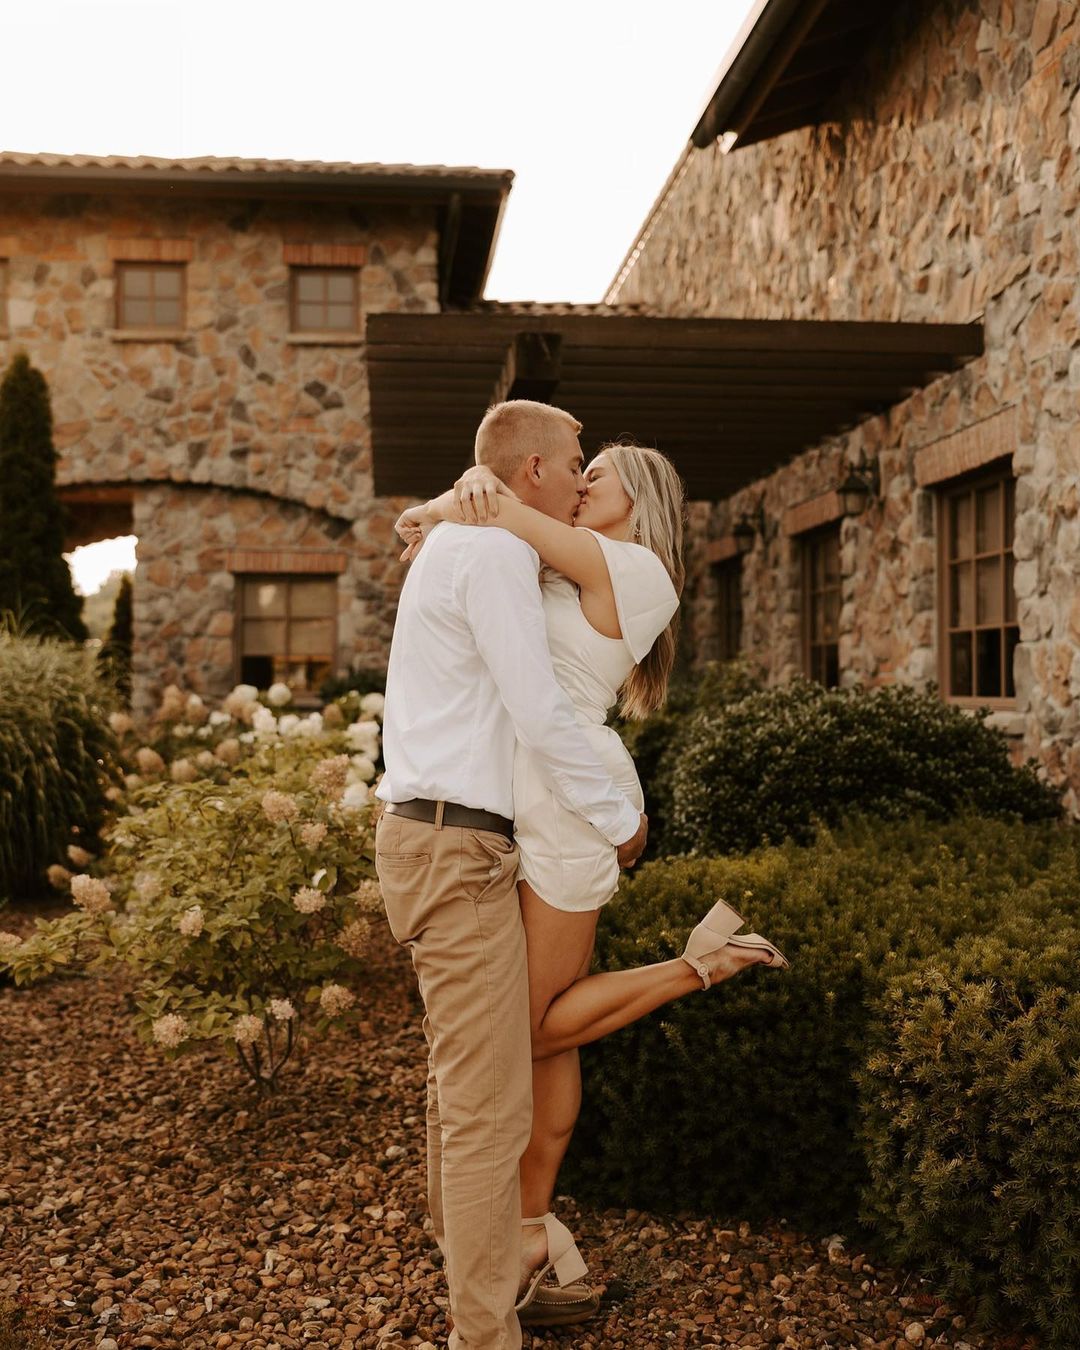 Tuscan dreams in Tennessee: These Olive Garden engagement pictures are going viral